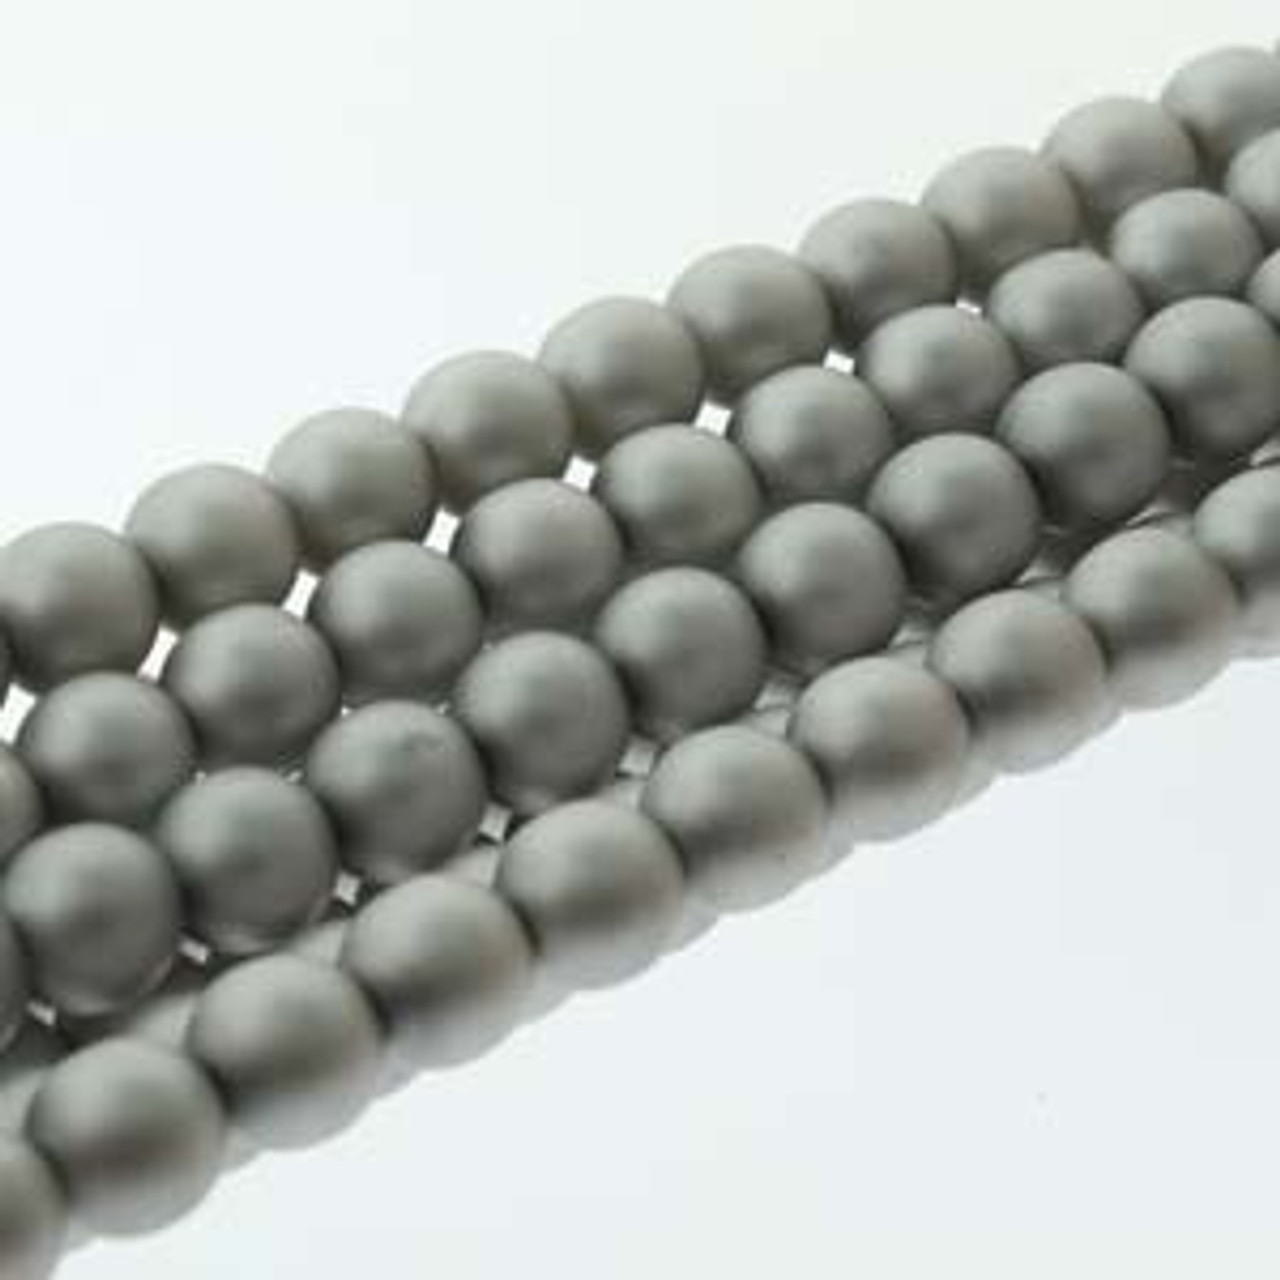 6mm Matte Silver Glass Pearls - 75 Beads